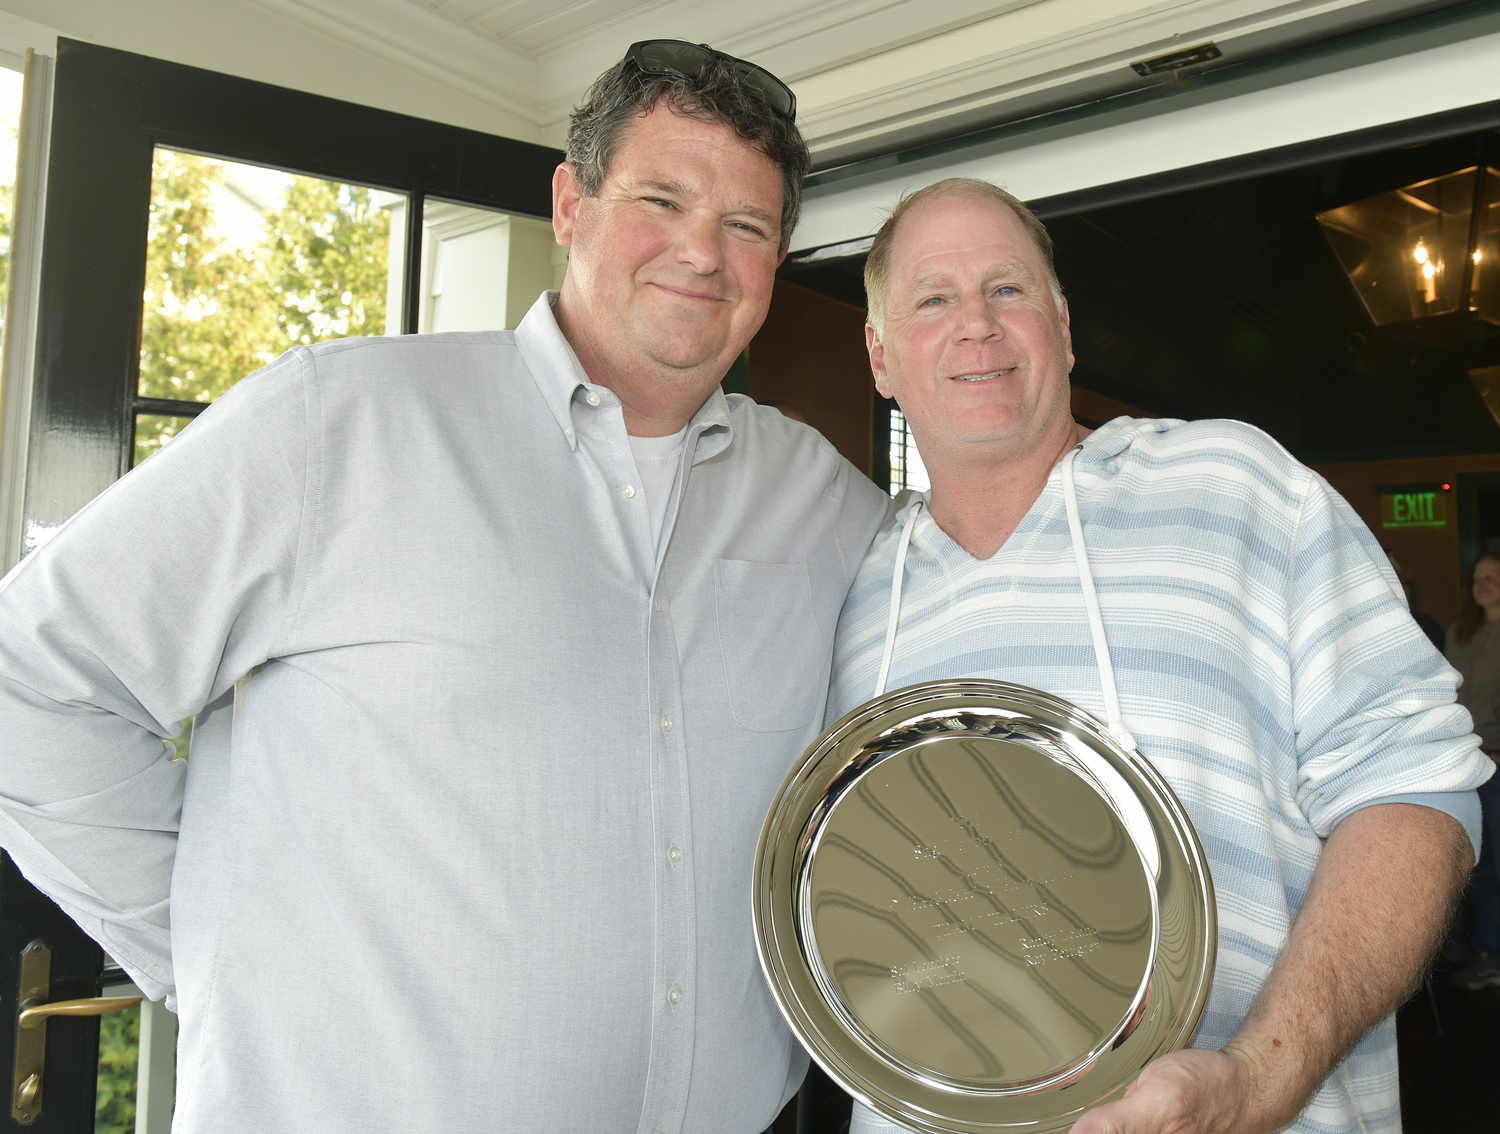 Gavin Menu with Ray Pettigrew of Team Whalers which has won the Whalers Cup nineteen times at the The Save the Whale boats Fundraiser at Baron's Cove in Sag Harbor on April 2.  DANA SHAW